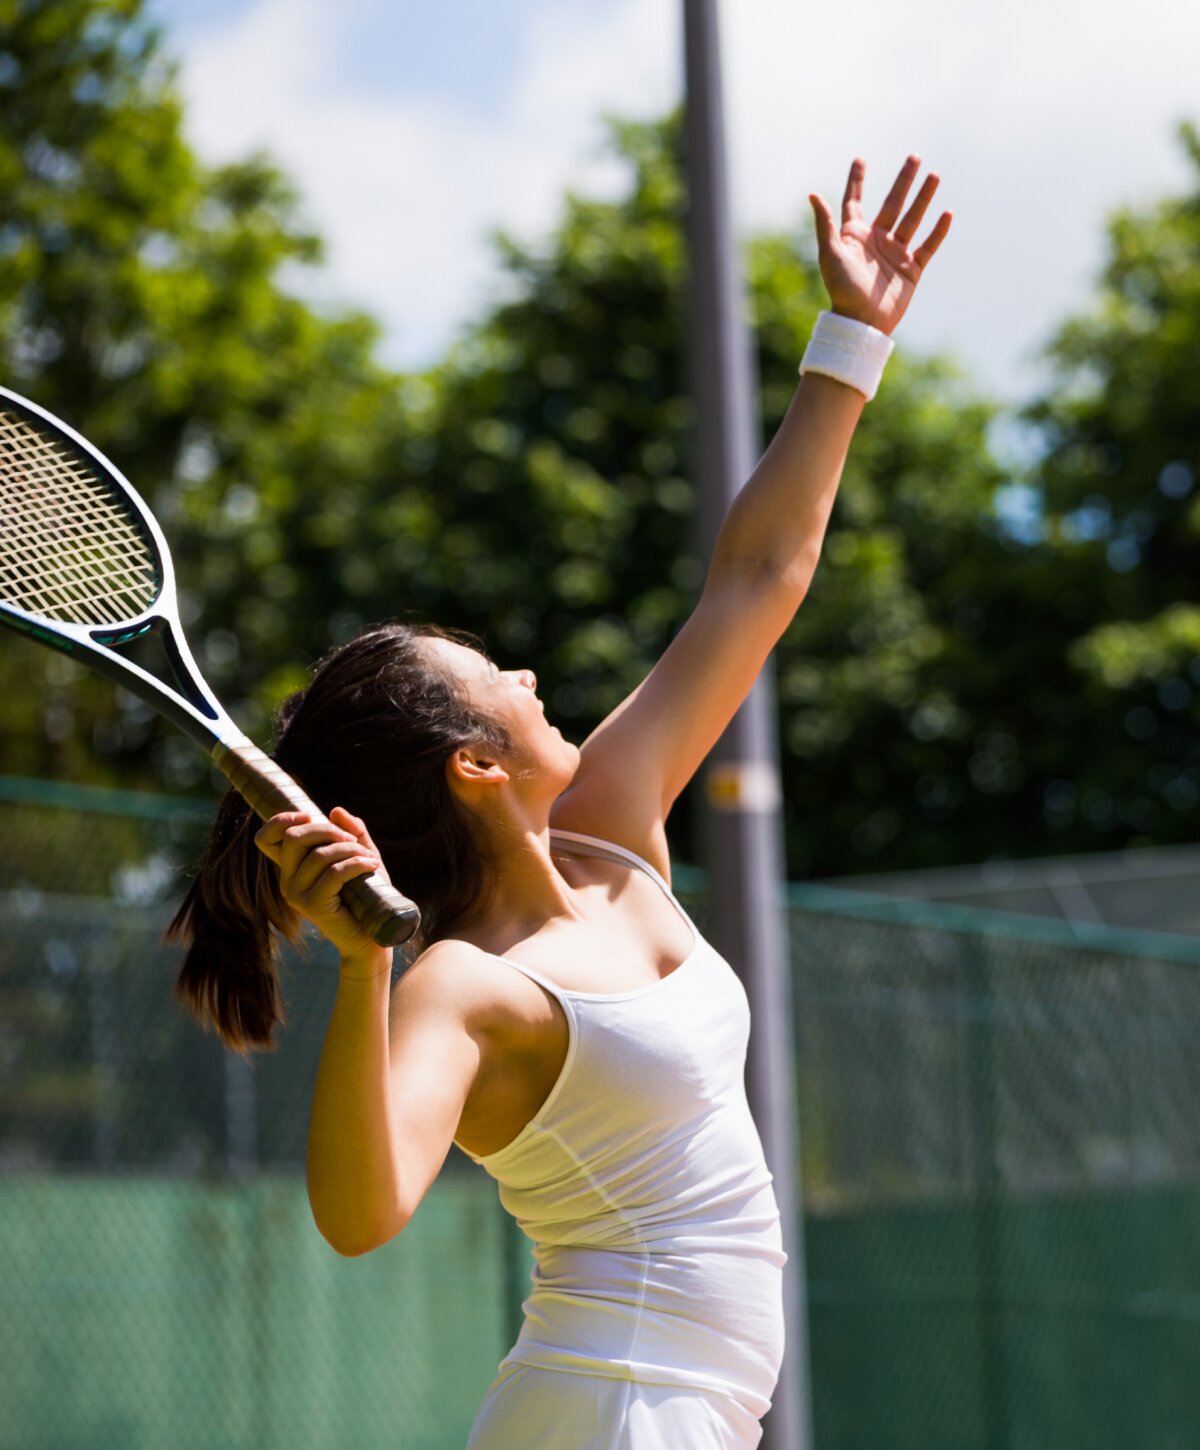 Sacramento Hyaluronic Acid Injections model playing tennis